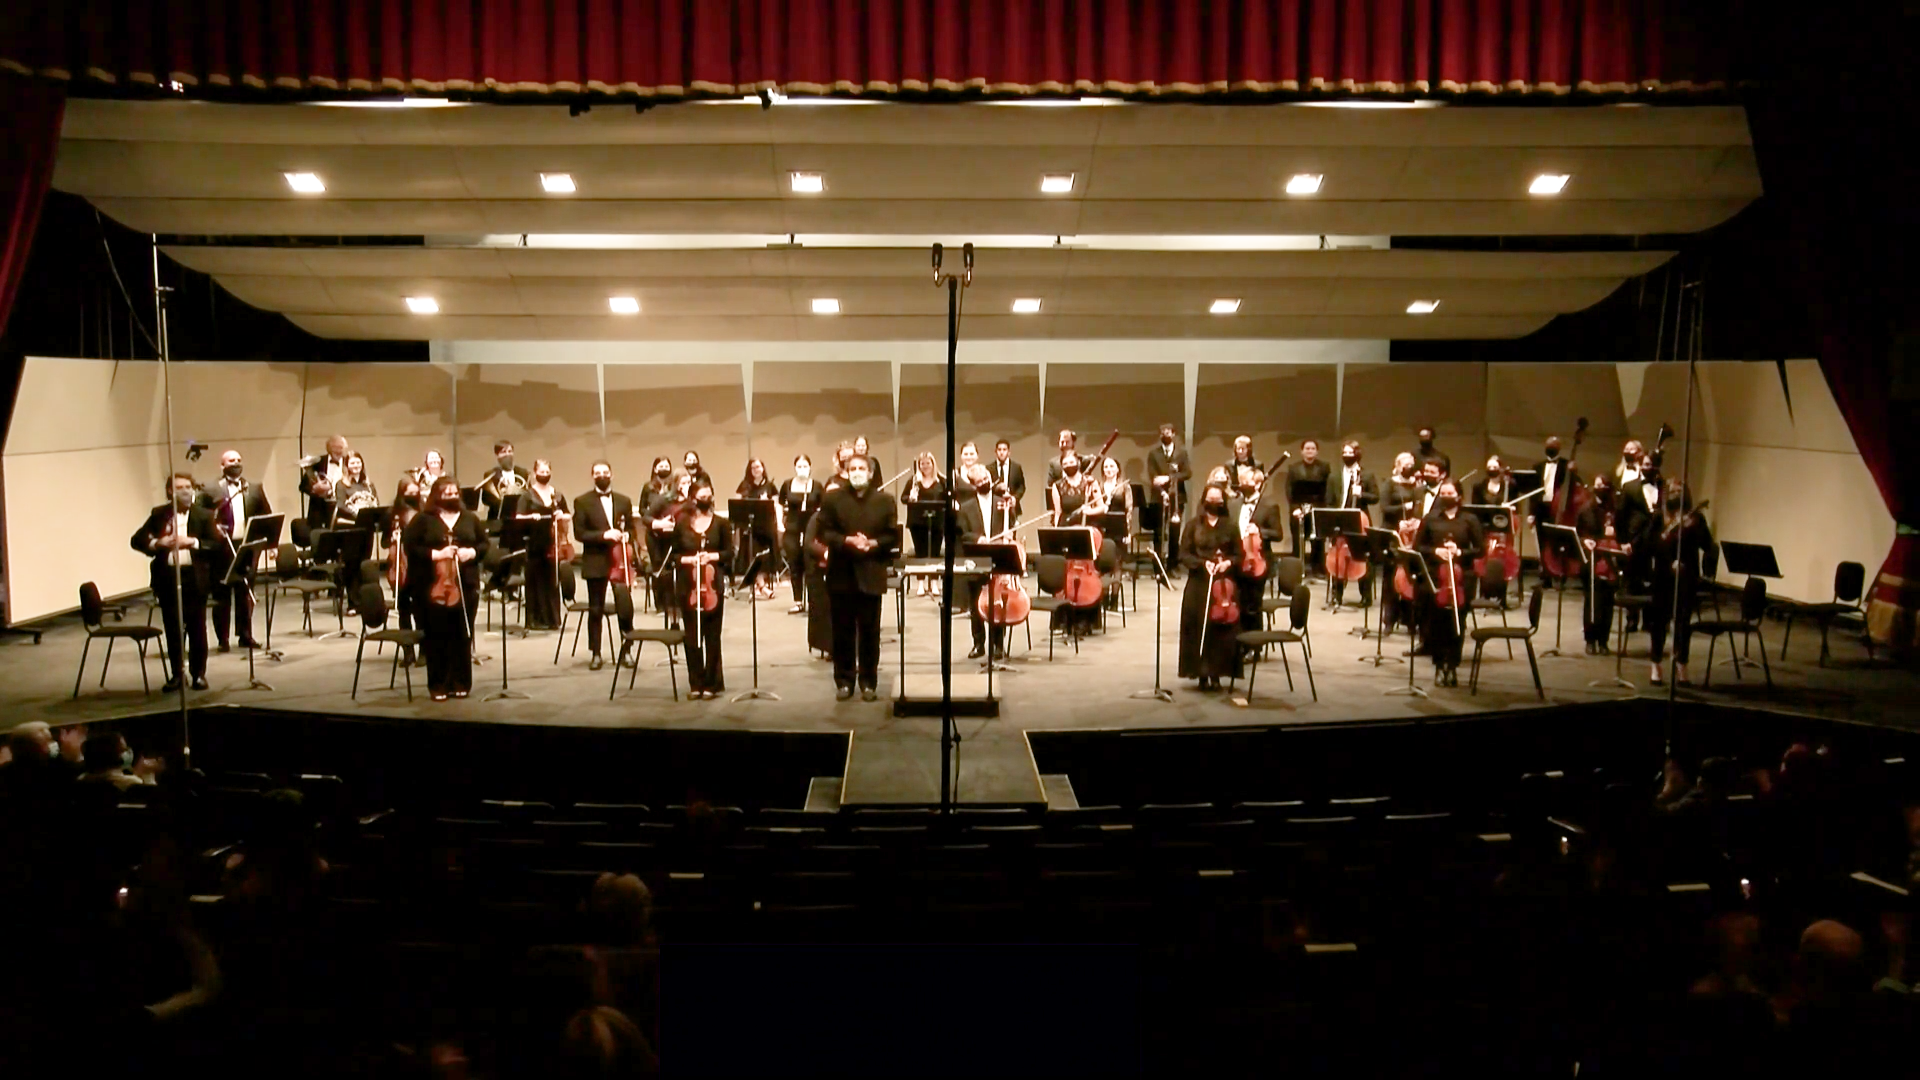 SIUE Orchestra in Concert